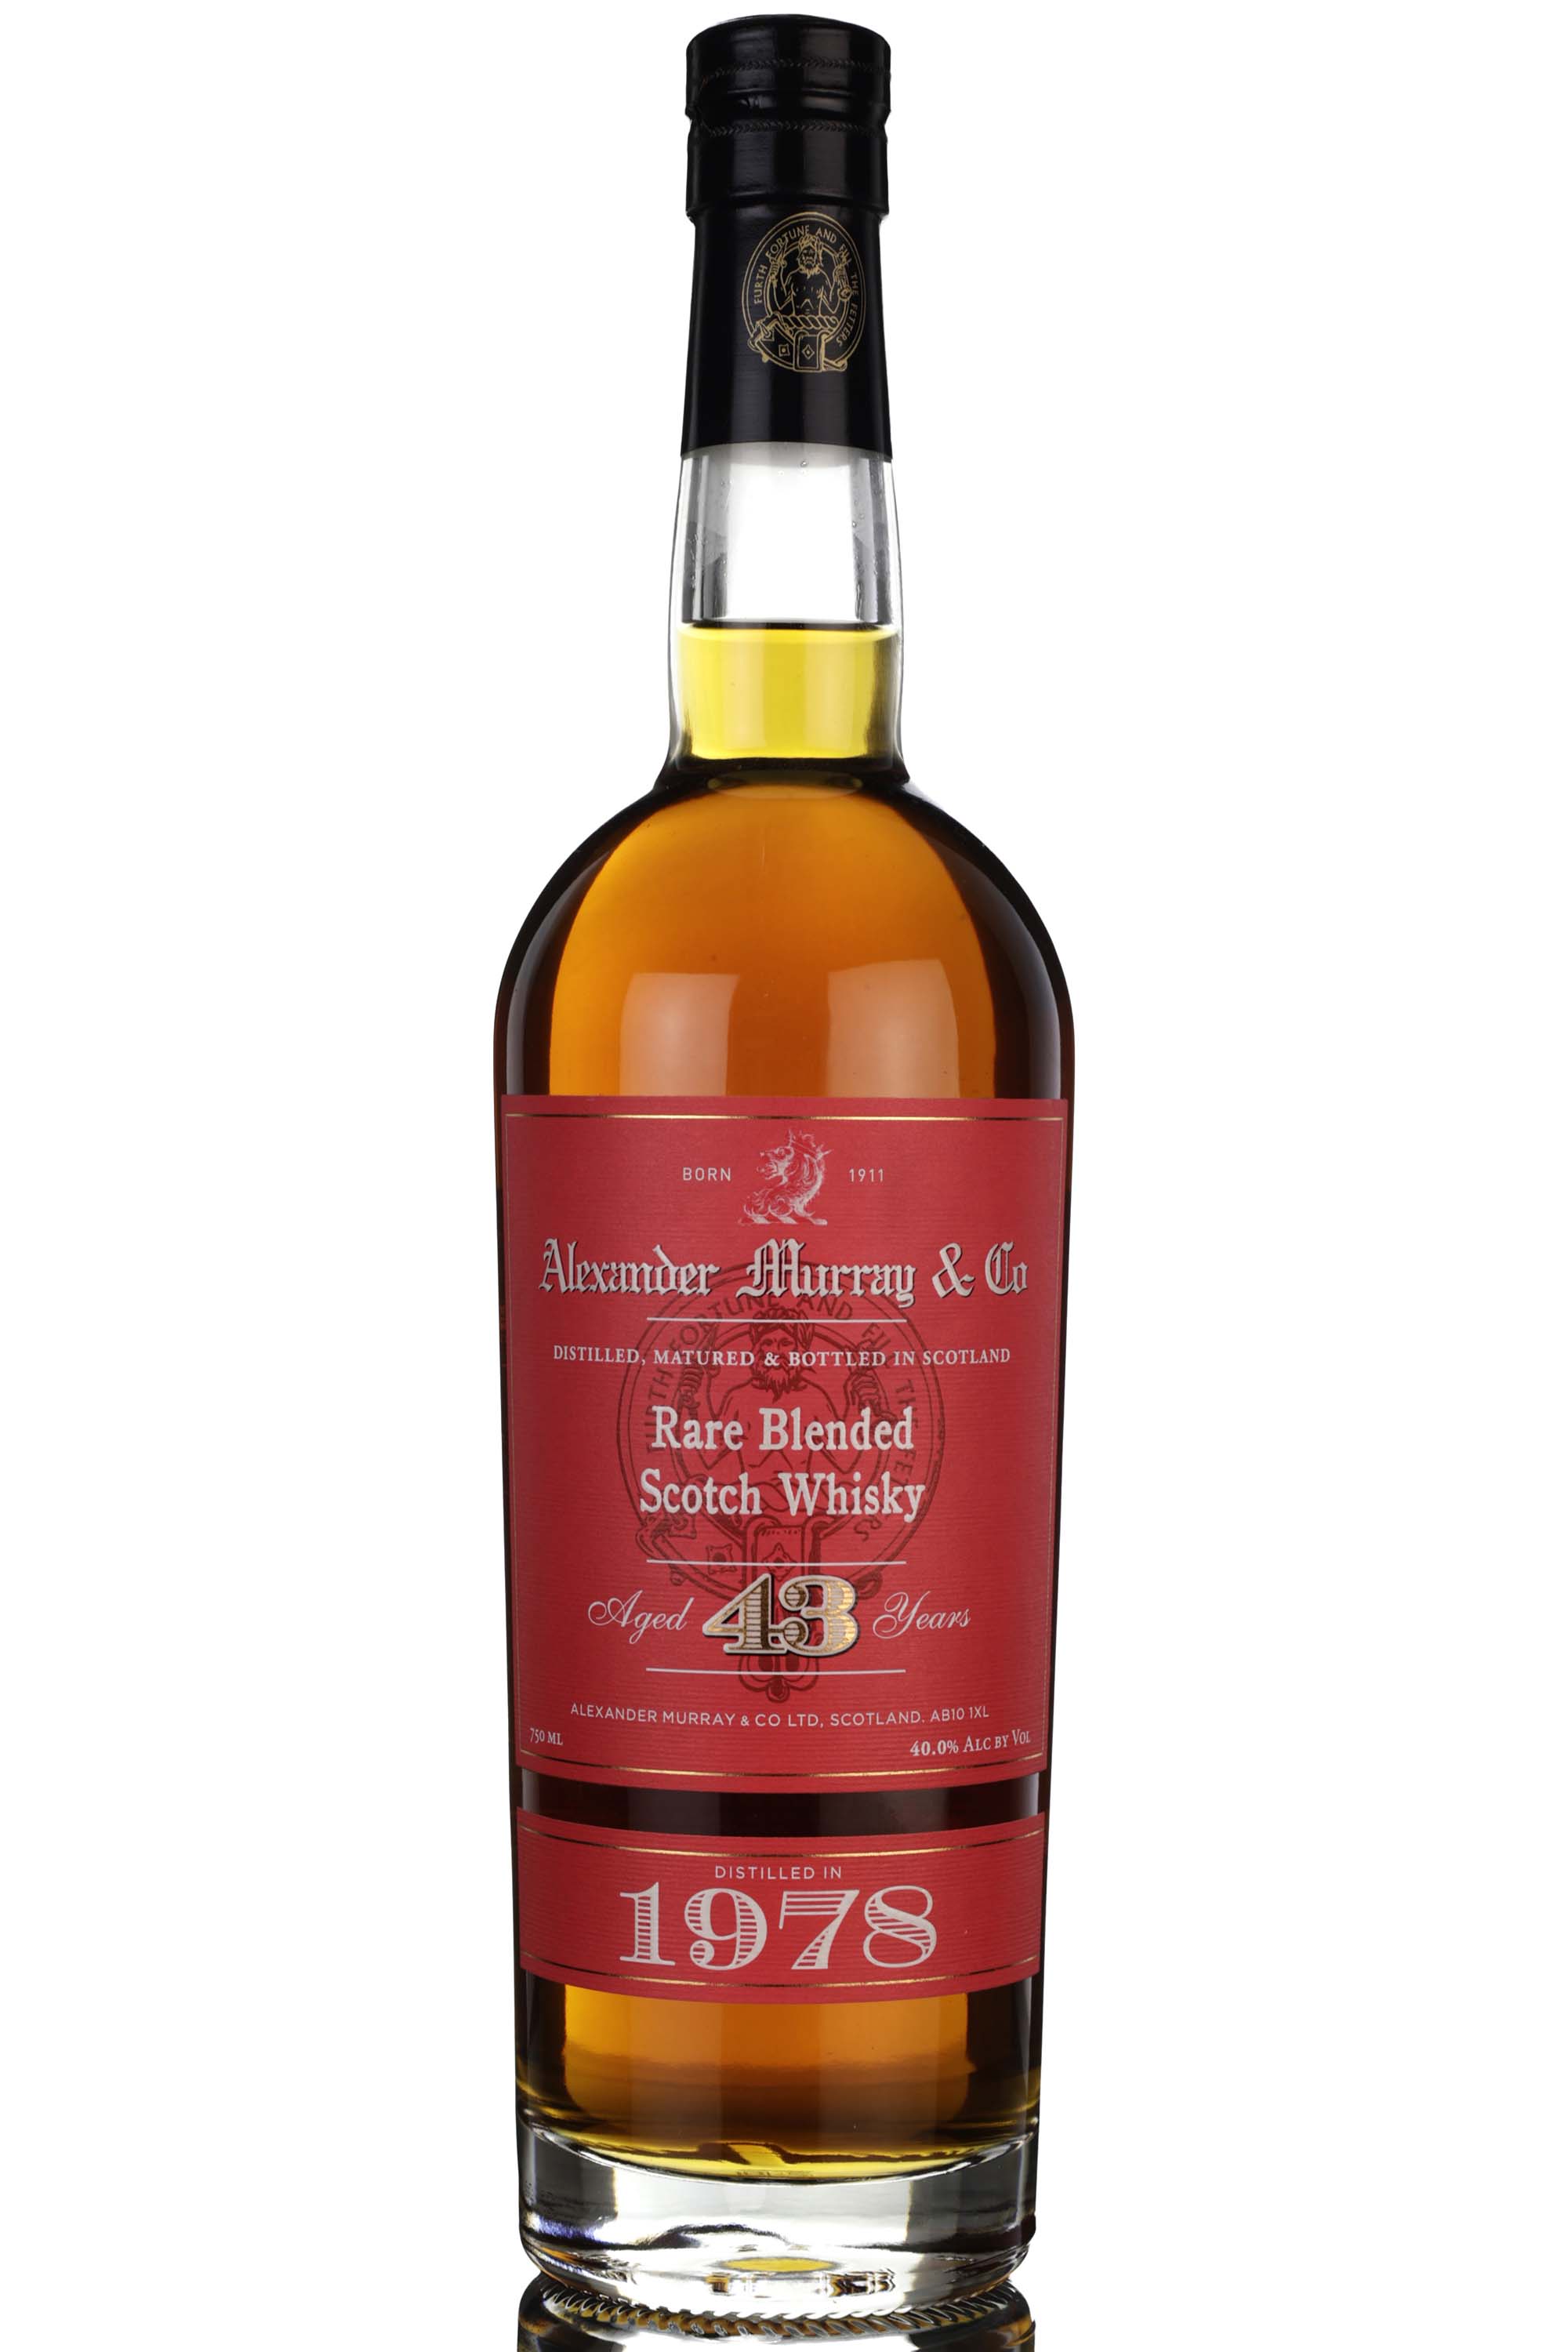 Rare Blended Scotch Whisky 1978 - 43 Year Old - Alexander Murray